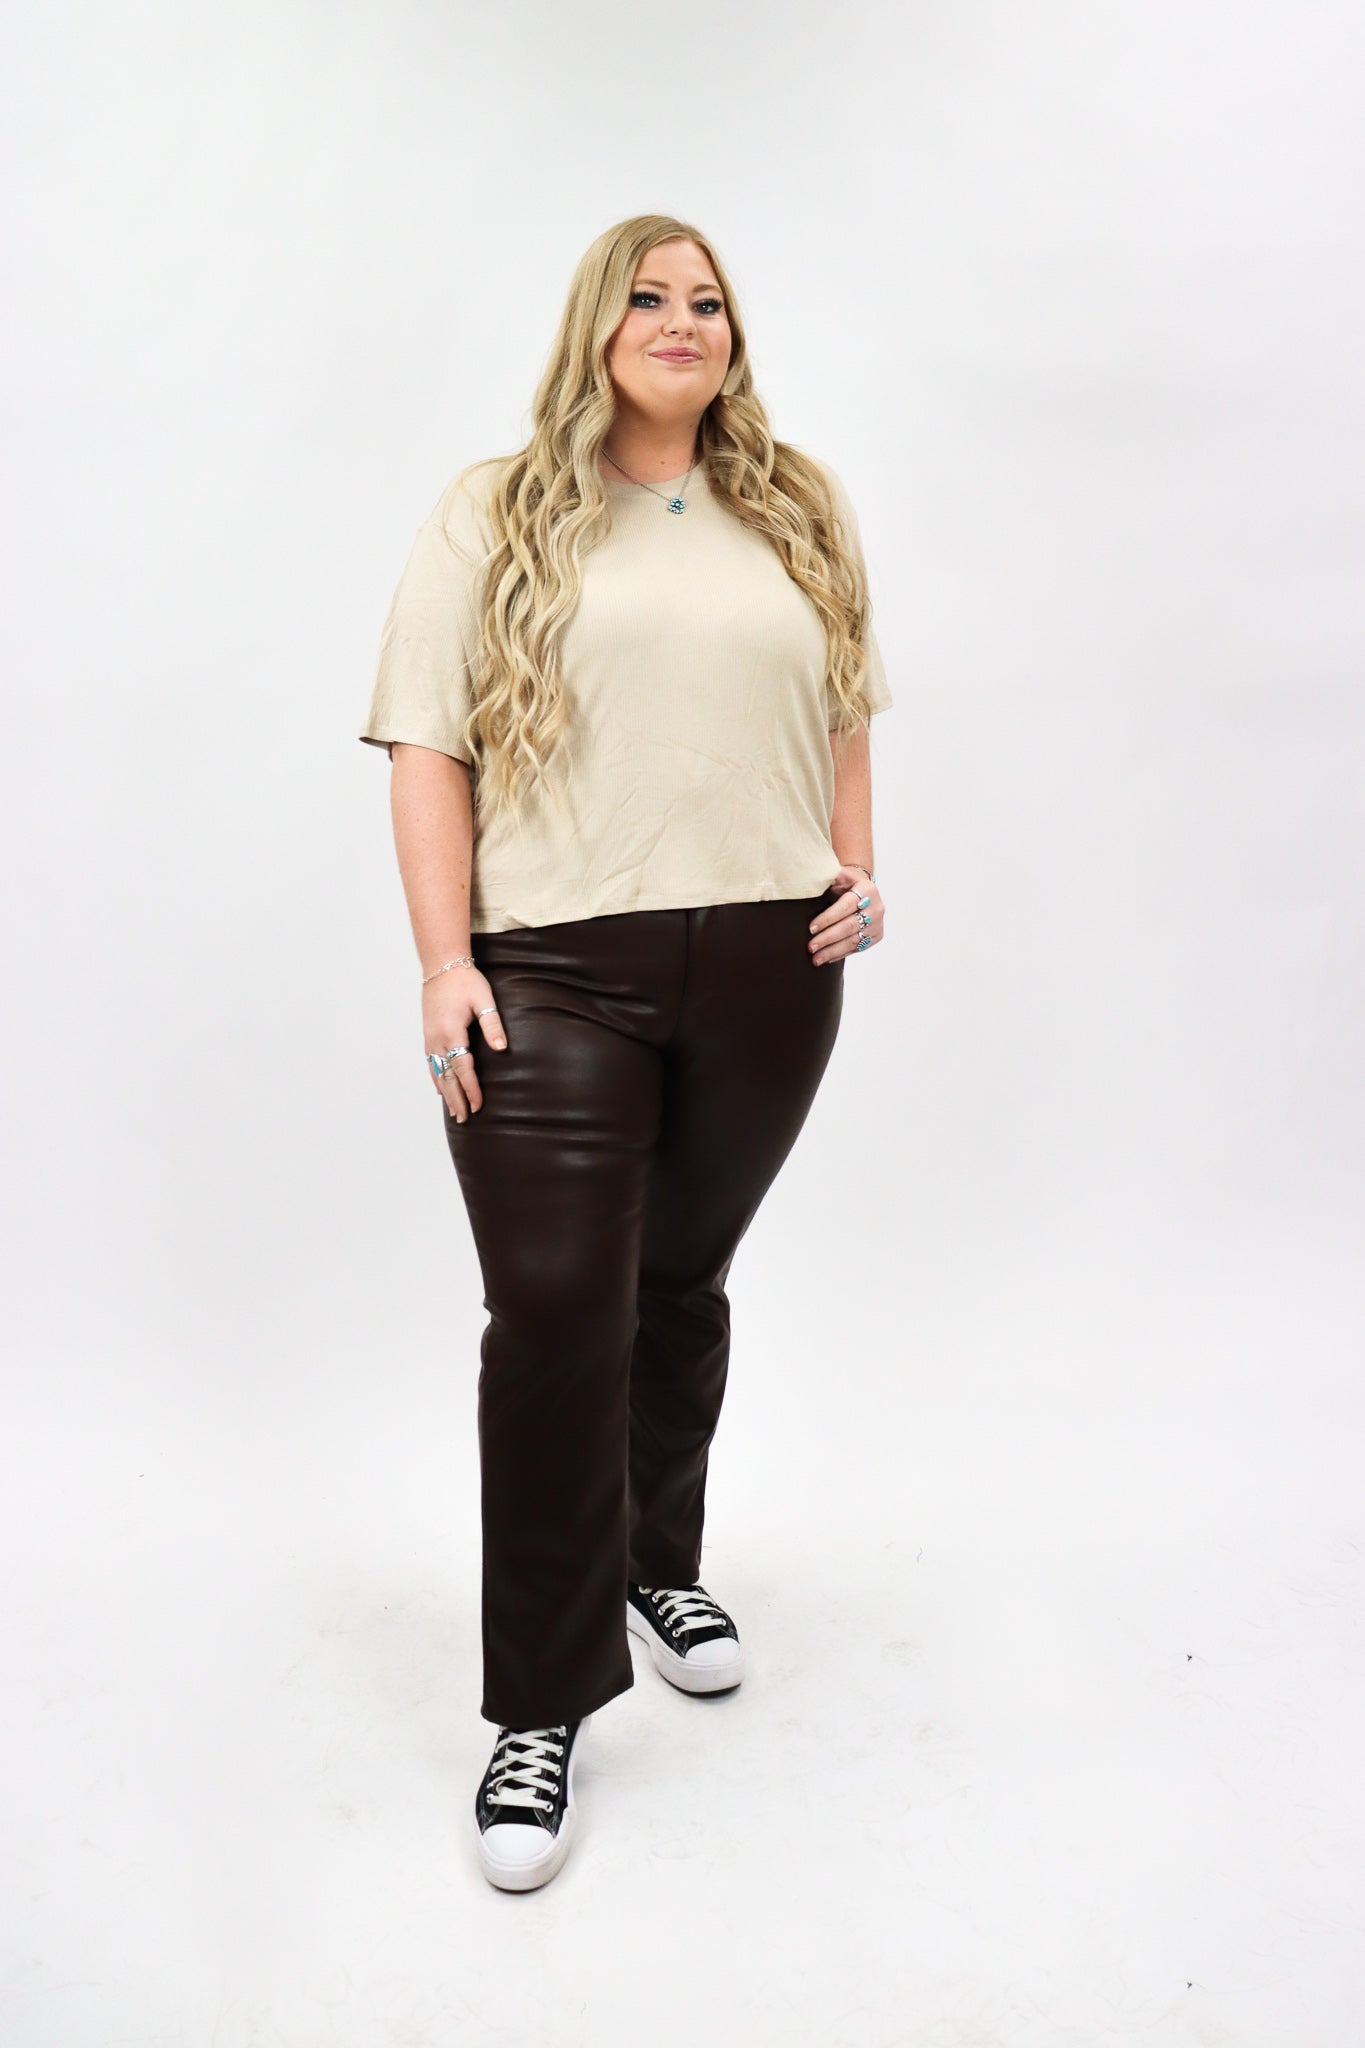 Judy Blue Grease Lightning Tummy Control Leather Pants – Macoma Boutique